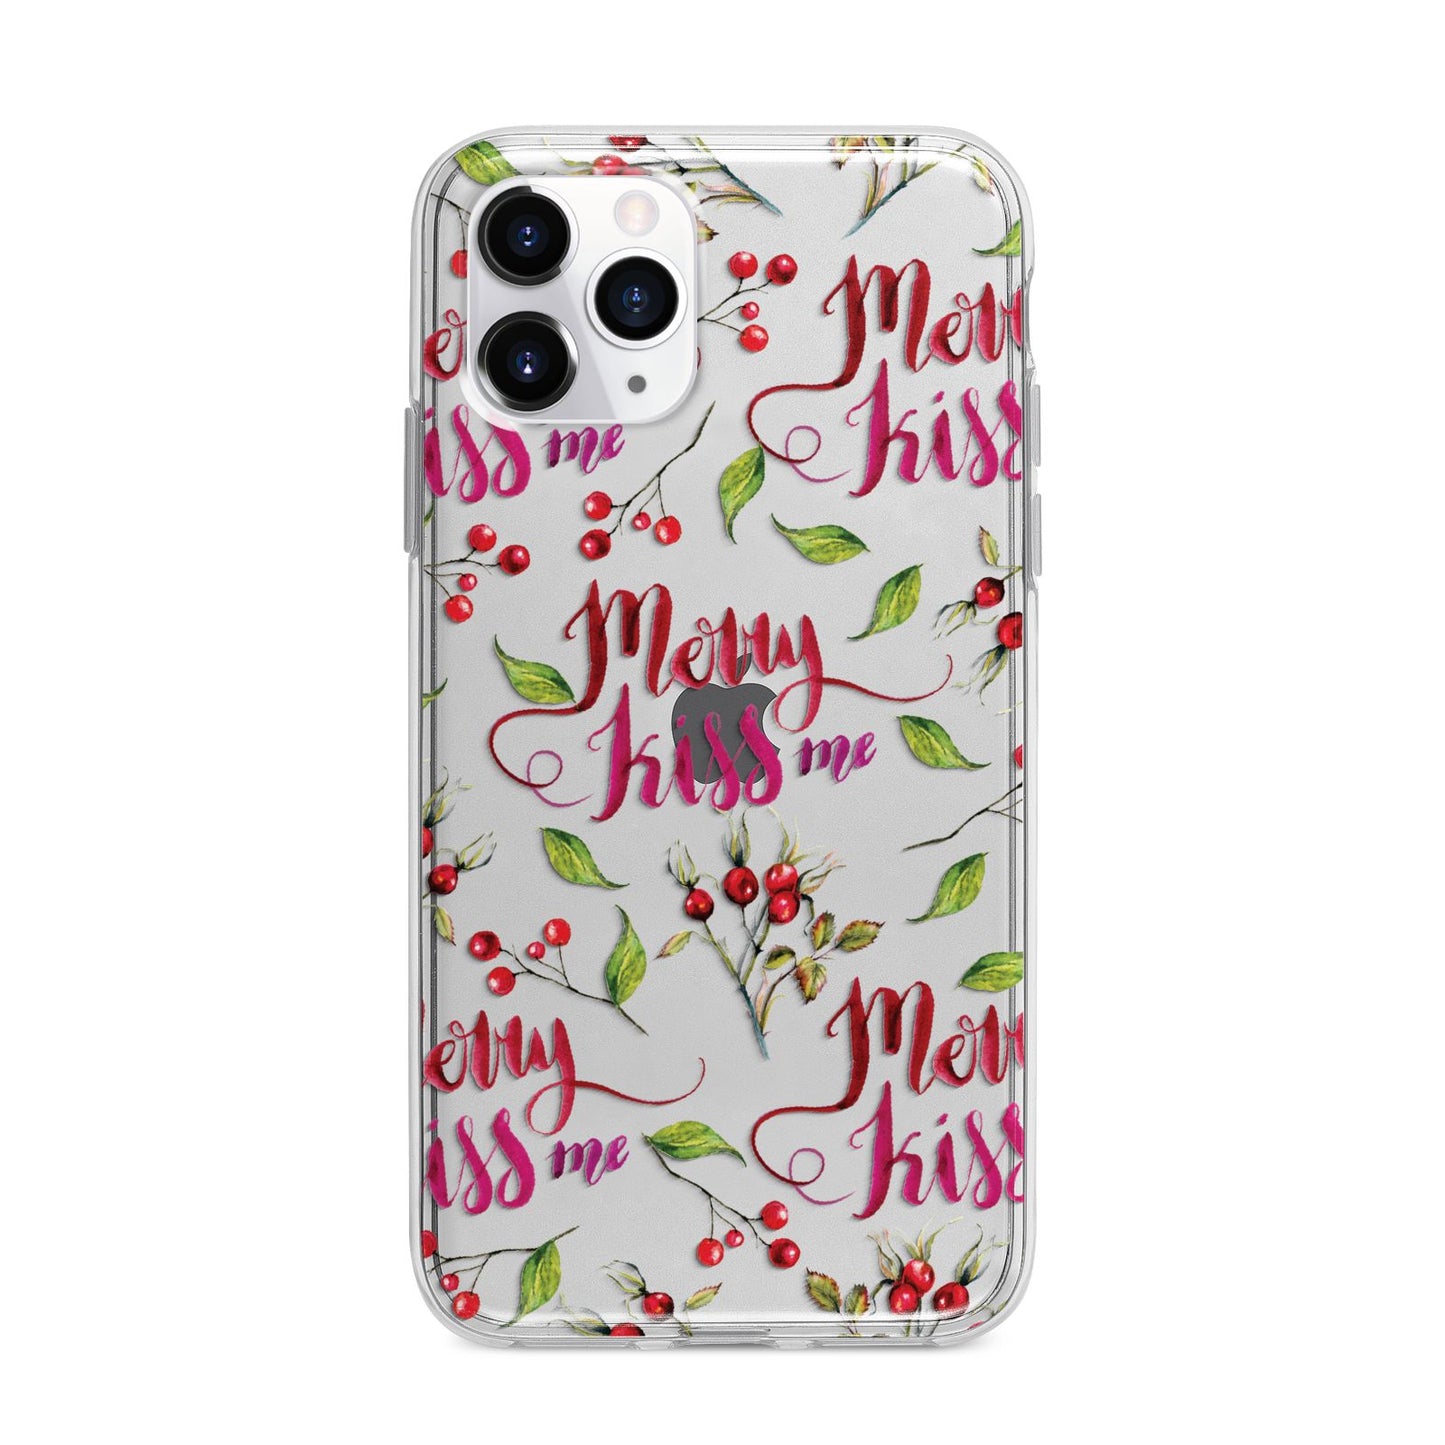 Merry kiss me Apple iPhone 11 Pro Max in Silver with Bumper Case